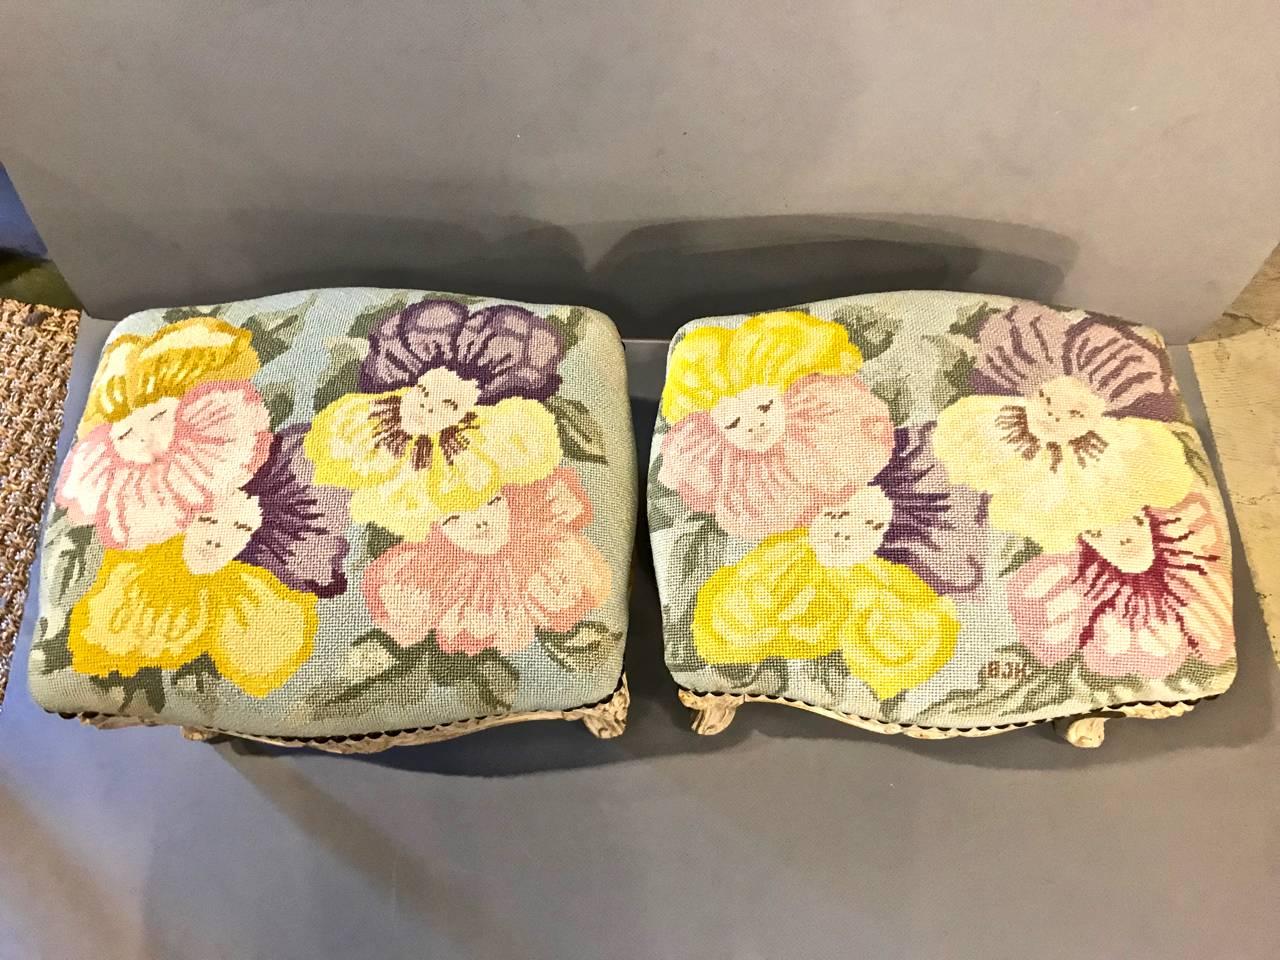 This is a unique associated pair of 18th and 19th century footstools that have been upholstered in a super chic and signed 1960s needlepoint. These stools are in the iconic Sister Parish style. One stool dates to the 18th century; its associated